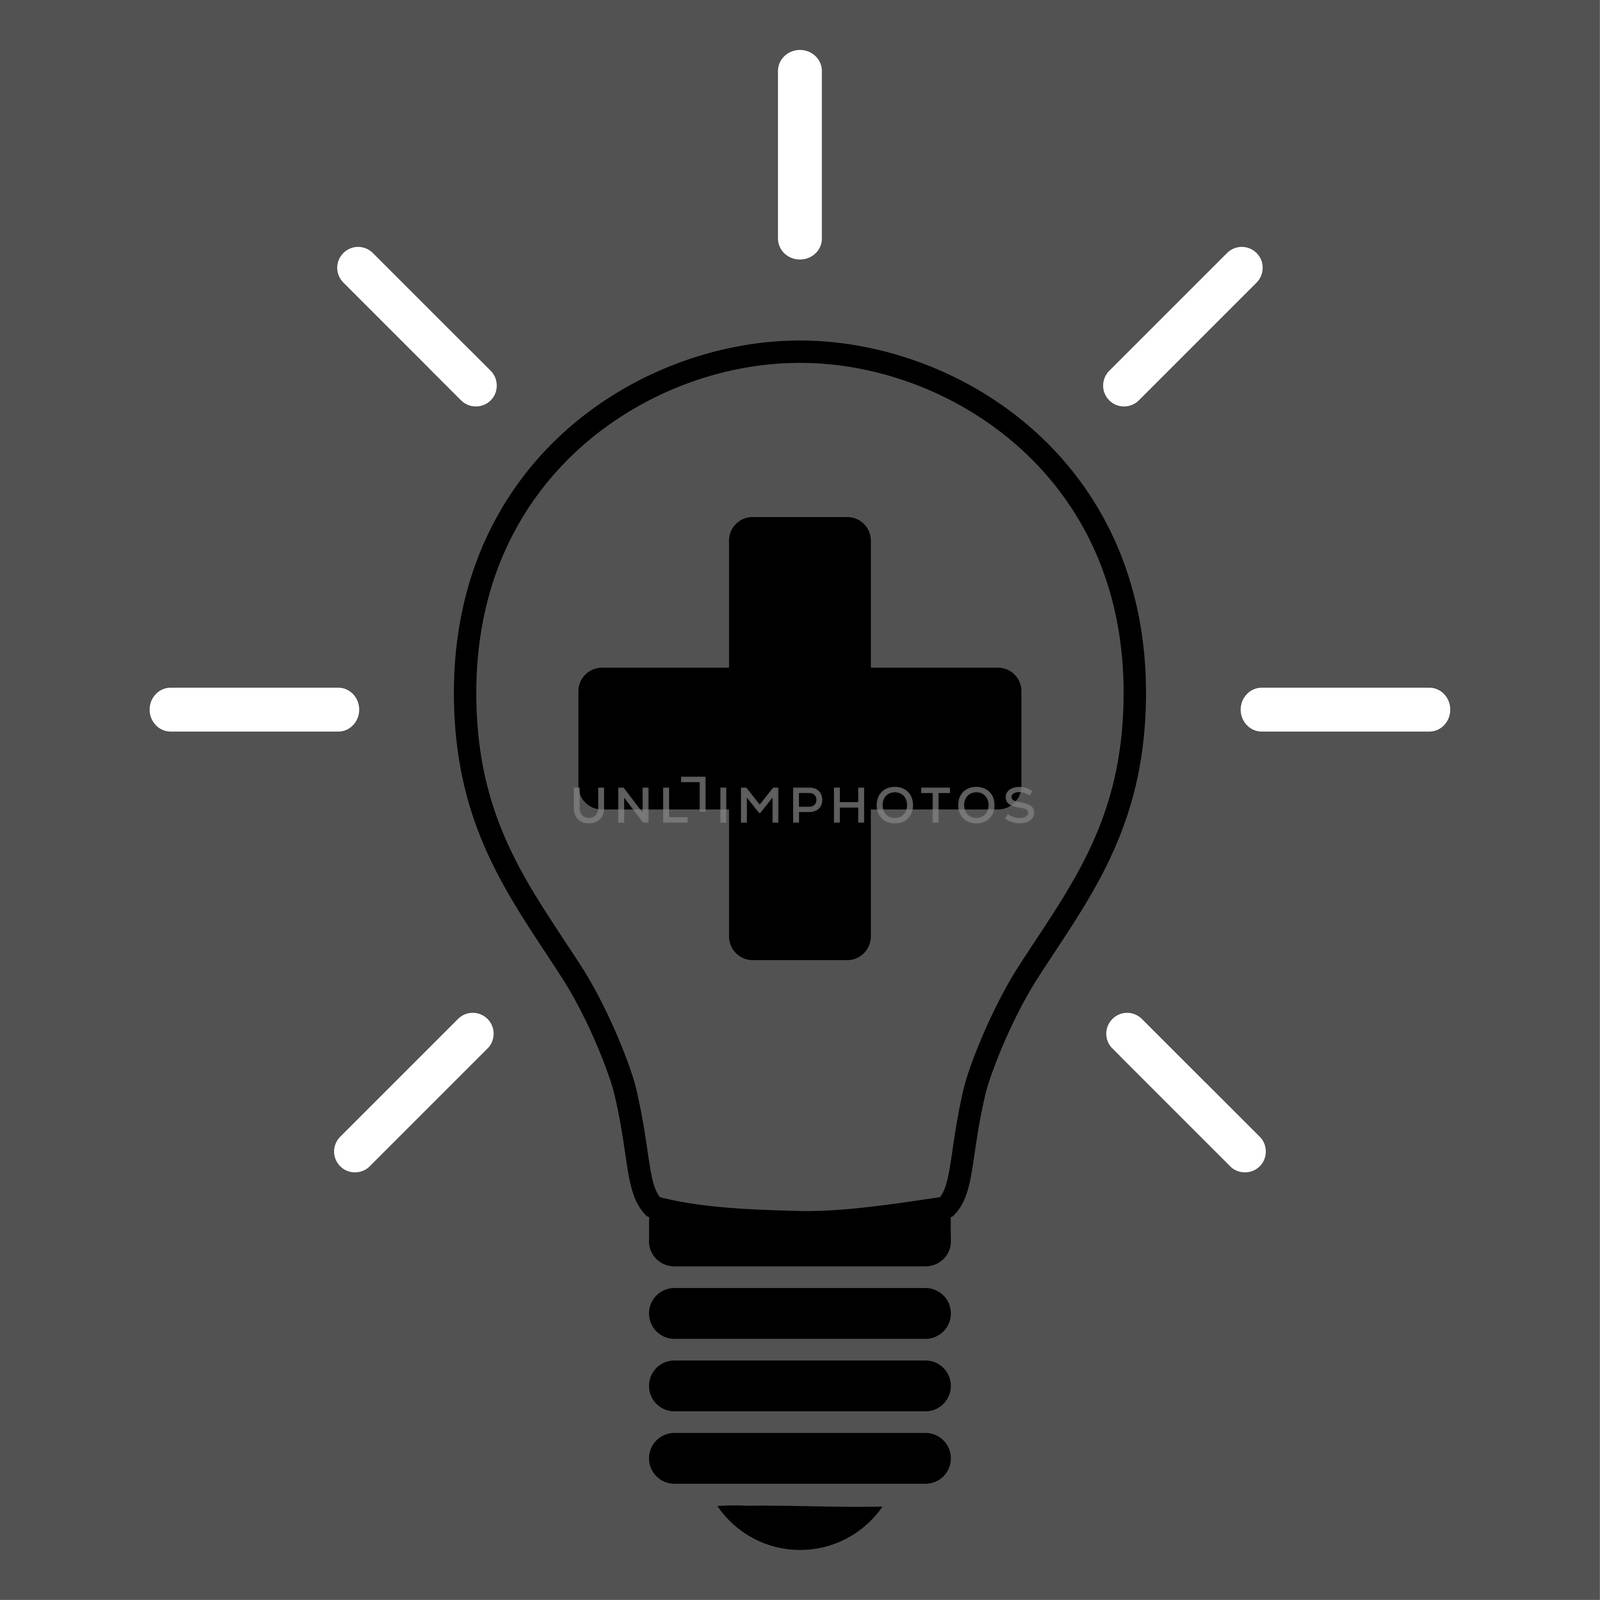 Creative Medicine Bulb raster icon. Style is bicolor flat symbol, black and white colors, rounded angles, gray background.